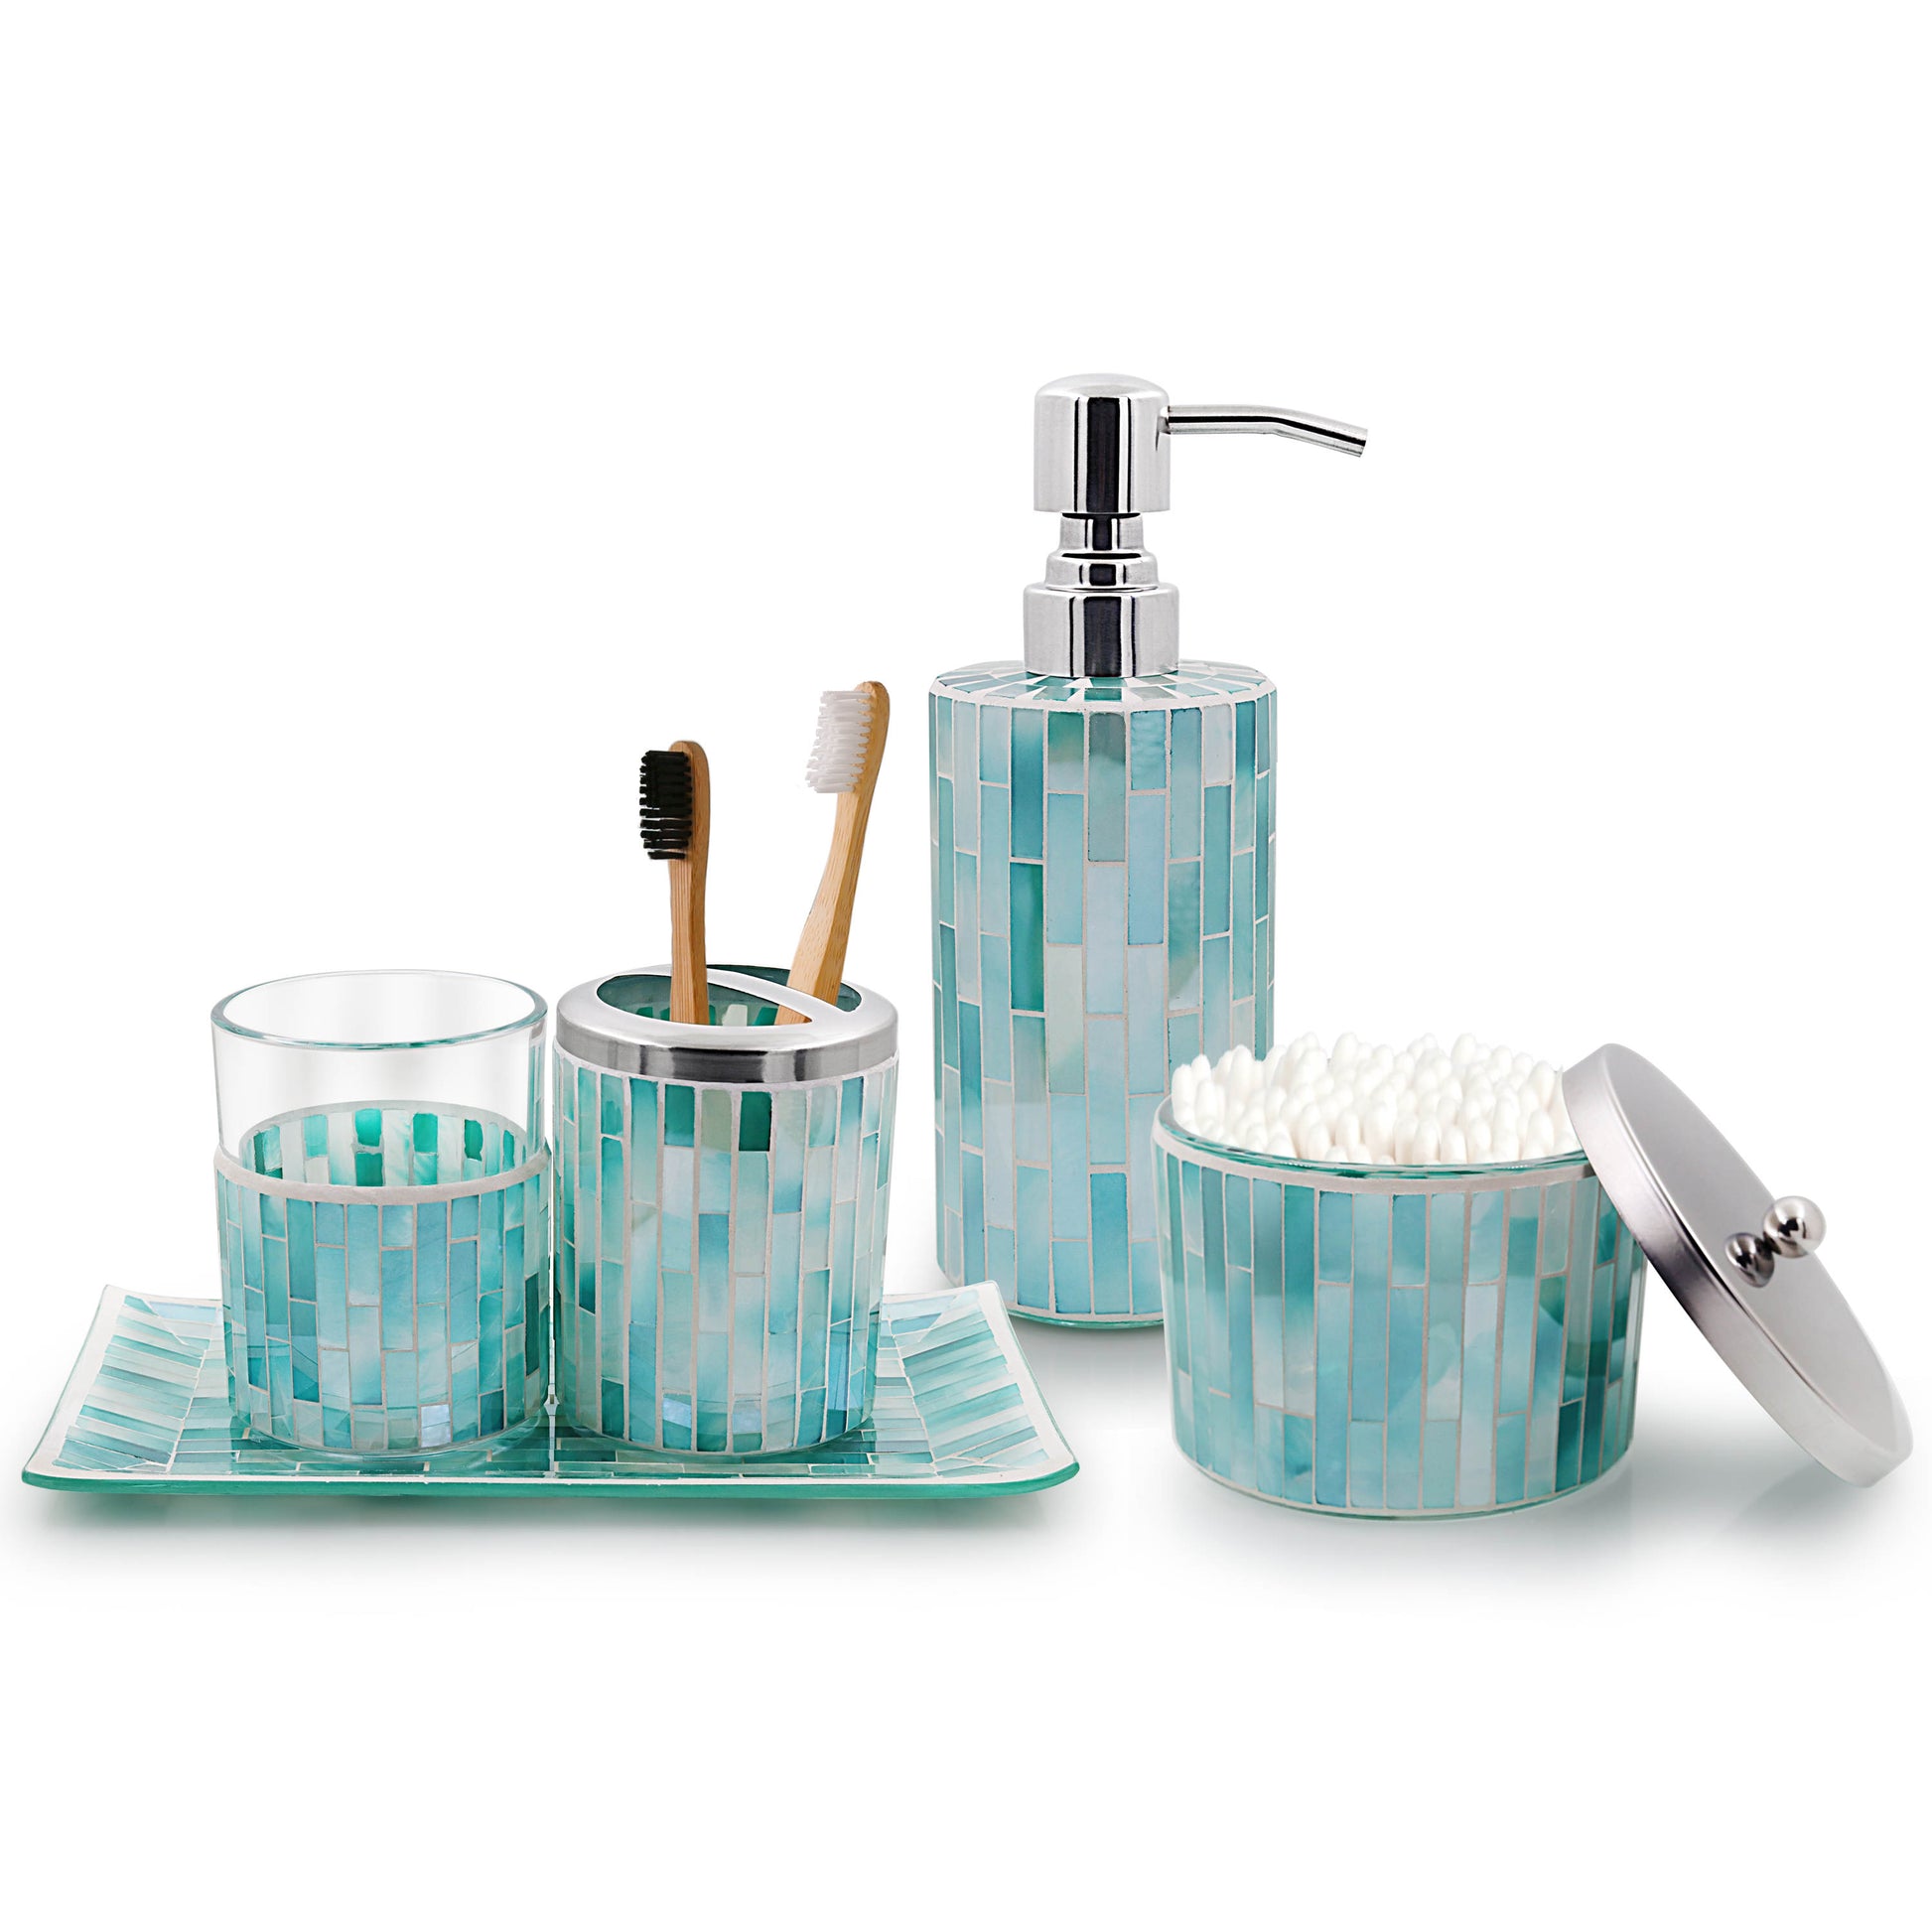 LushAccents Bathroom Accessories Set, 5-Piece Decorative Glass Bathroom  Accessories Set, Soap Dispenser, Vanity Tray, Jar, Toothbrush Holder,  Tumbler